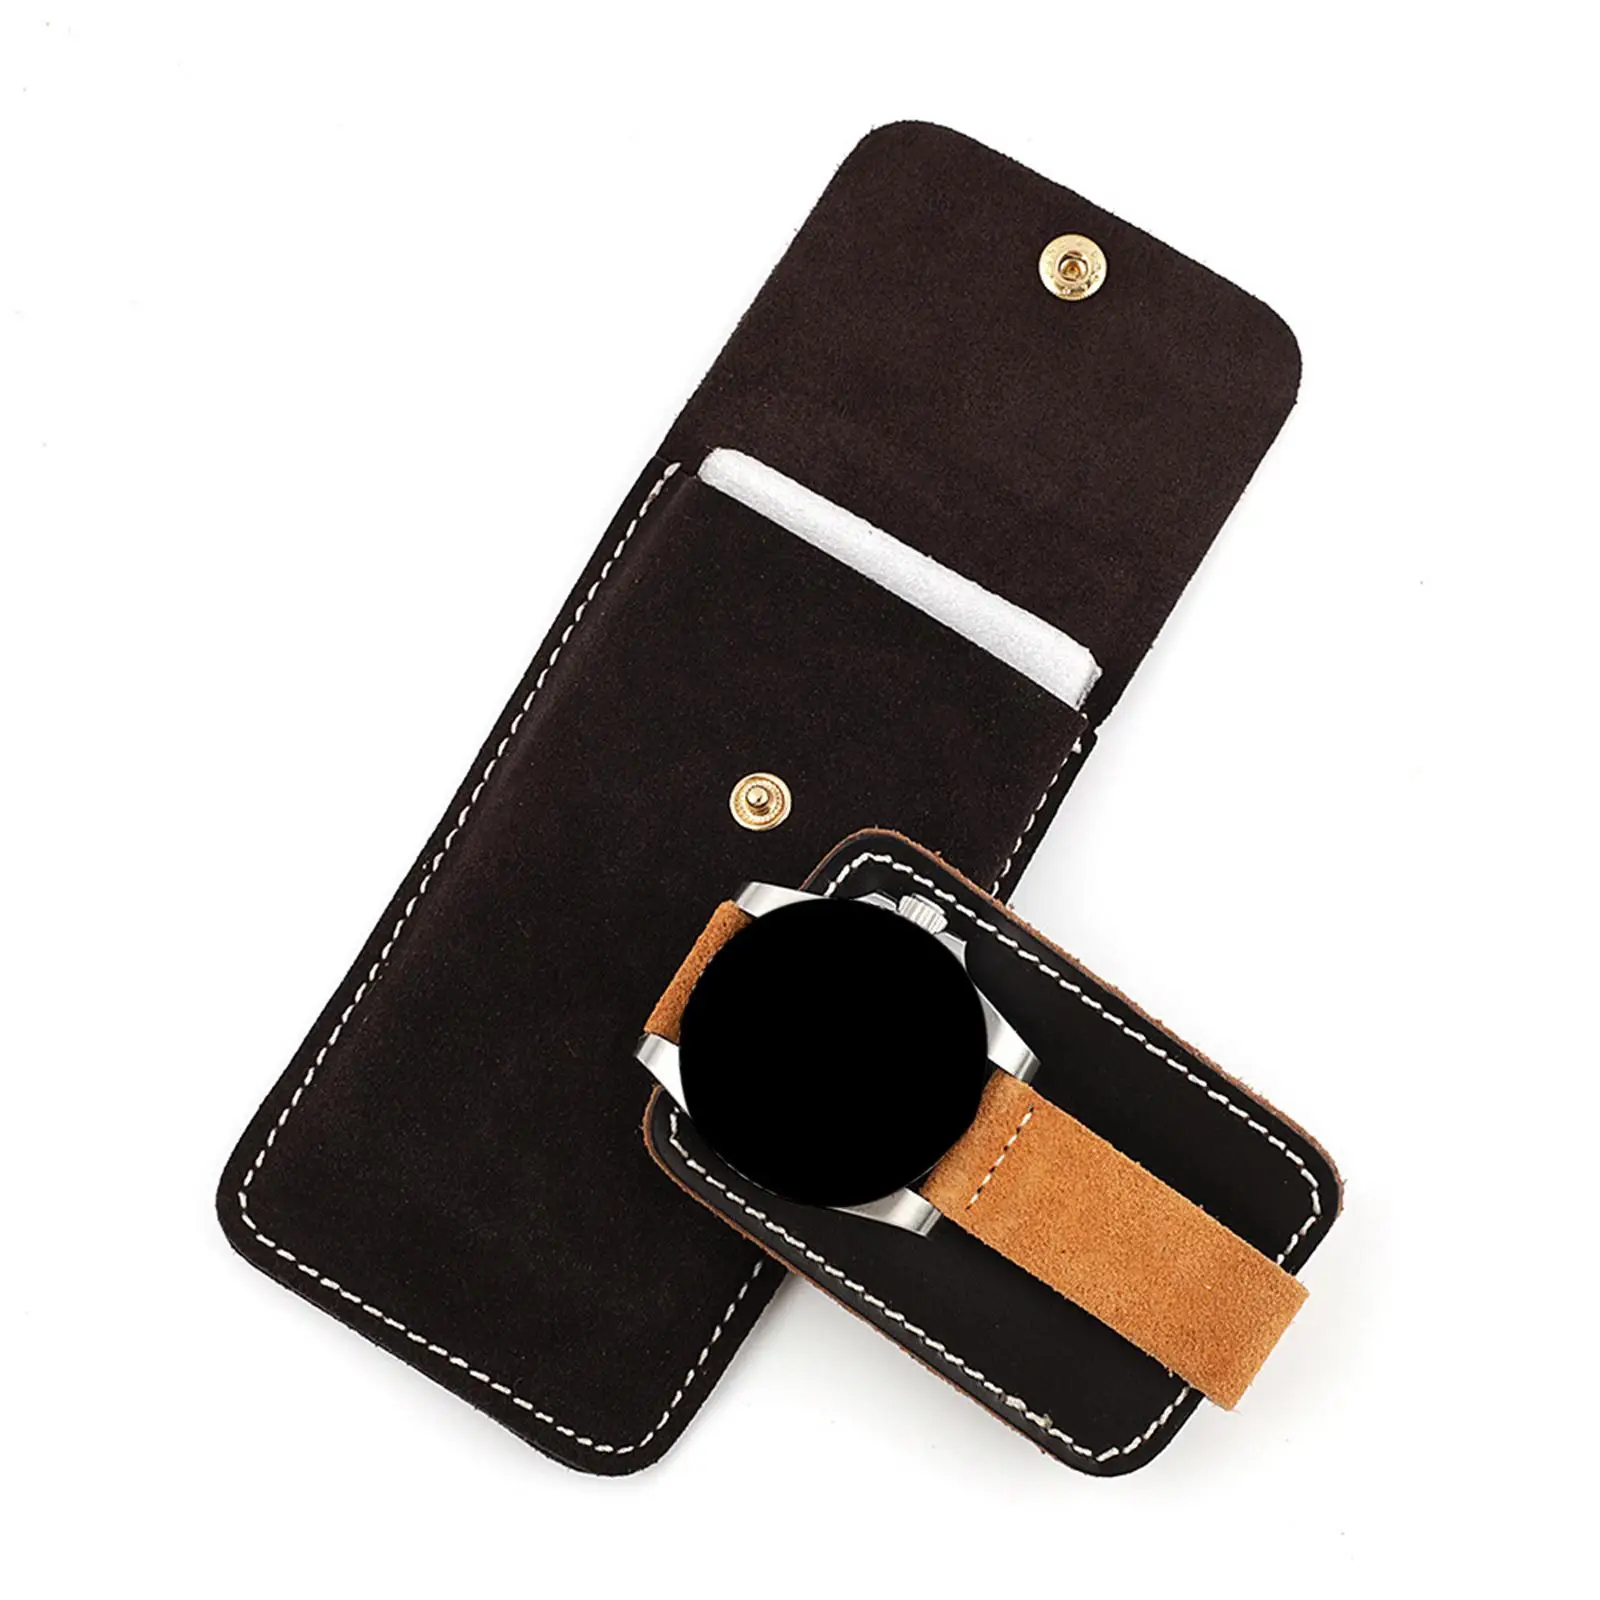 Watch Pouch Watch Holder PU Leather Universal Portable Gift Soft Organizer for Watches Men Women Jewelry Accessory Travelling